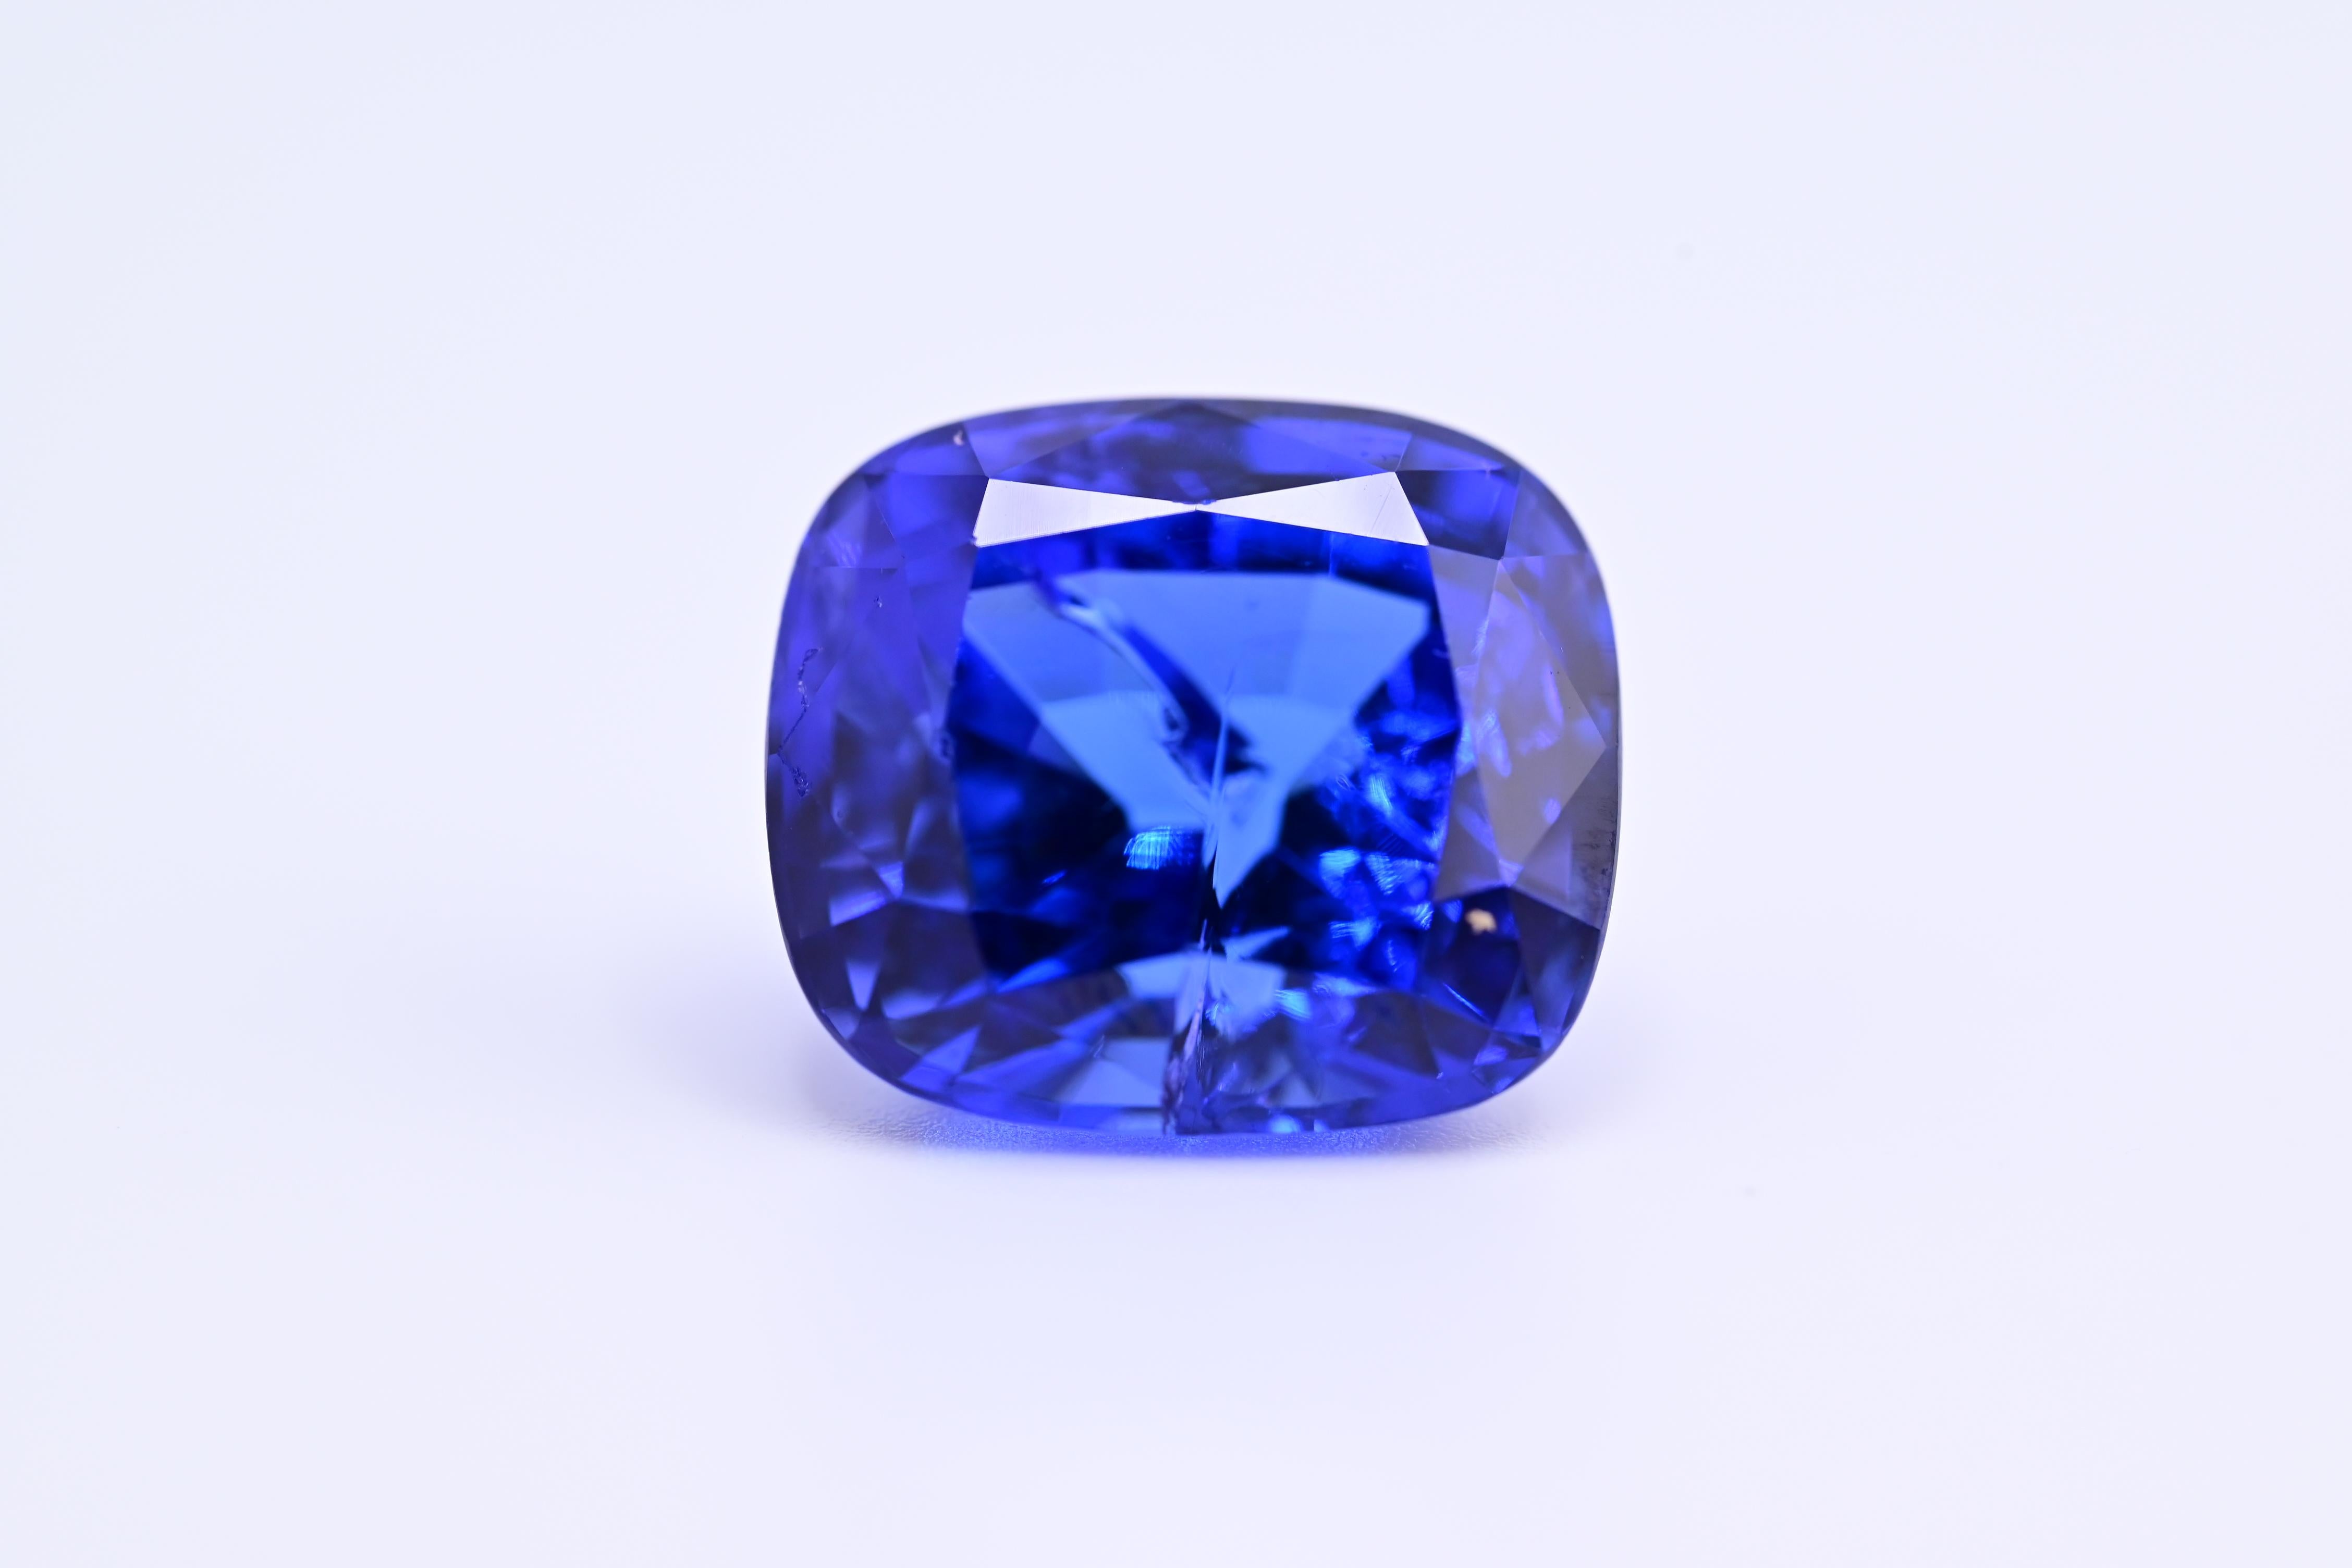 Cushion Cut Exceptional Vivid Tanzanite Loose Stone 11.01 Carats GIA Certified For Sale